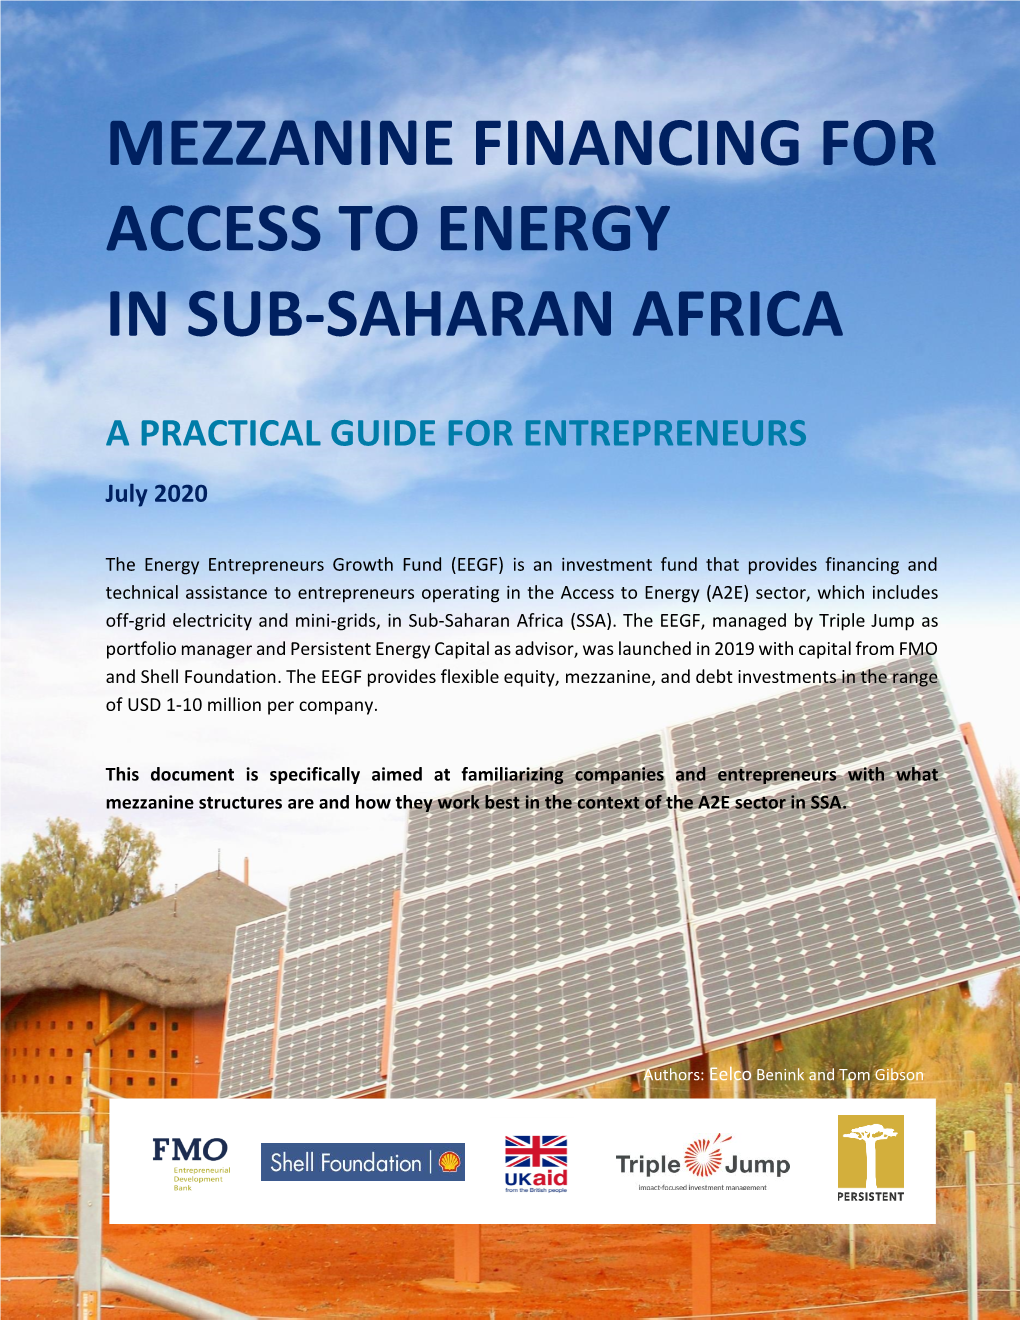 Mezzanine Financing for Access to Energy in Sub-Saharan Africa